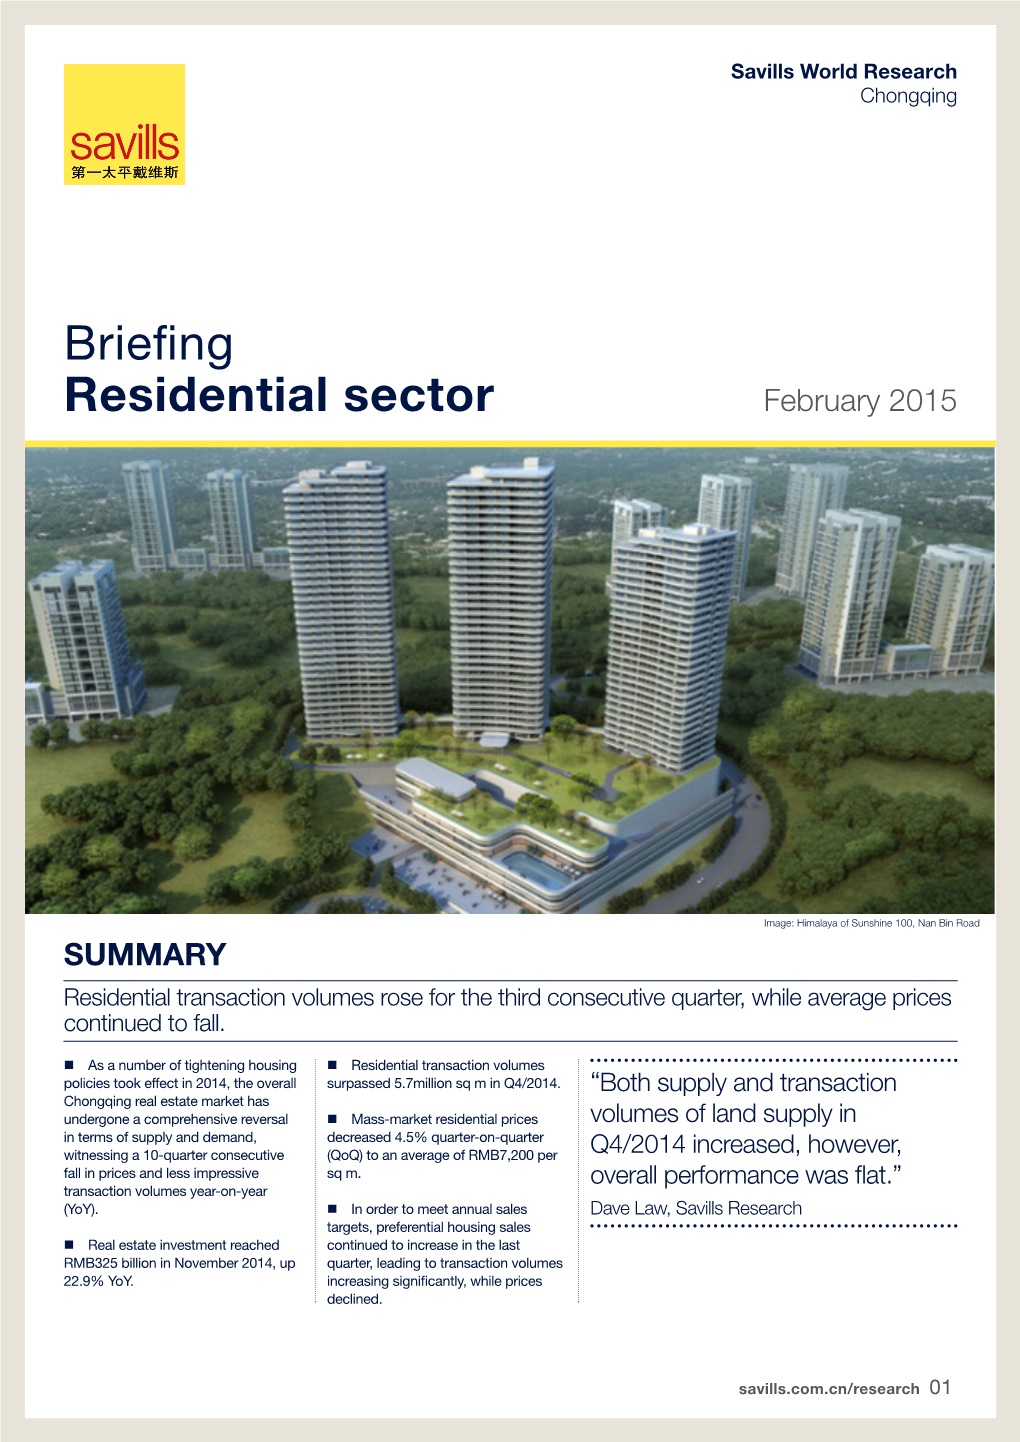 Briefing Residential Sector February 2015